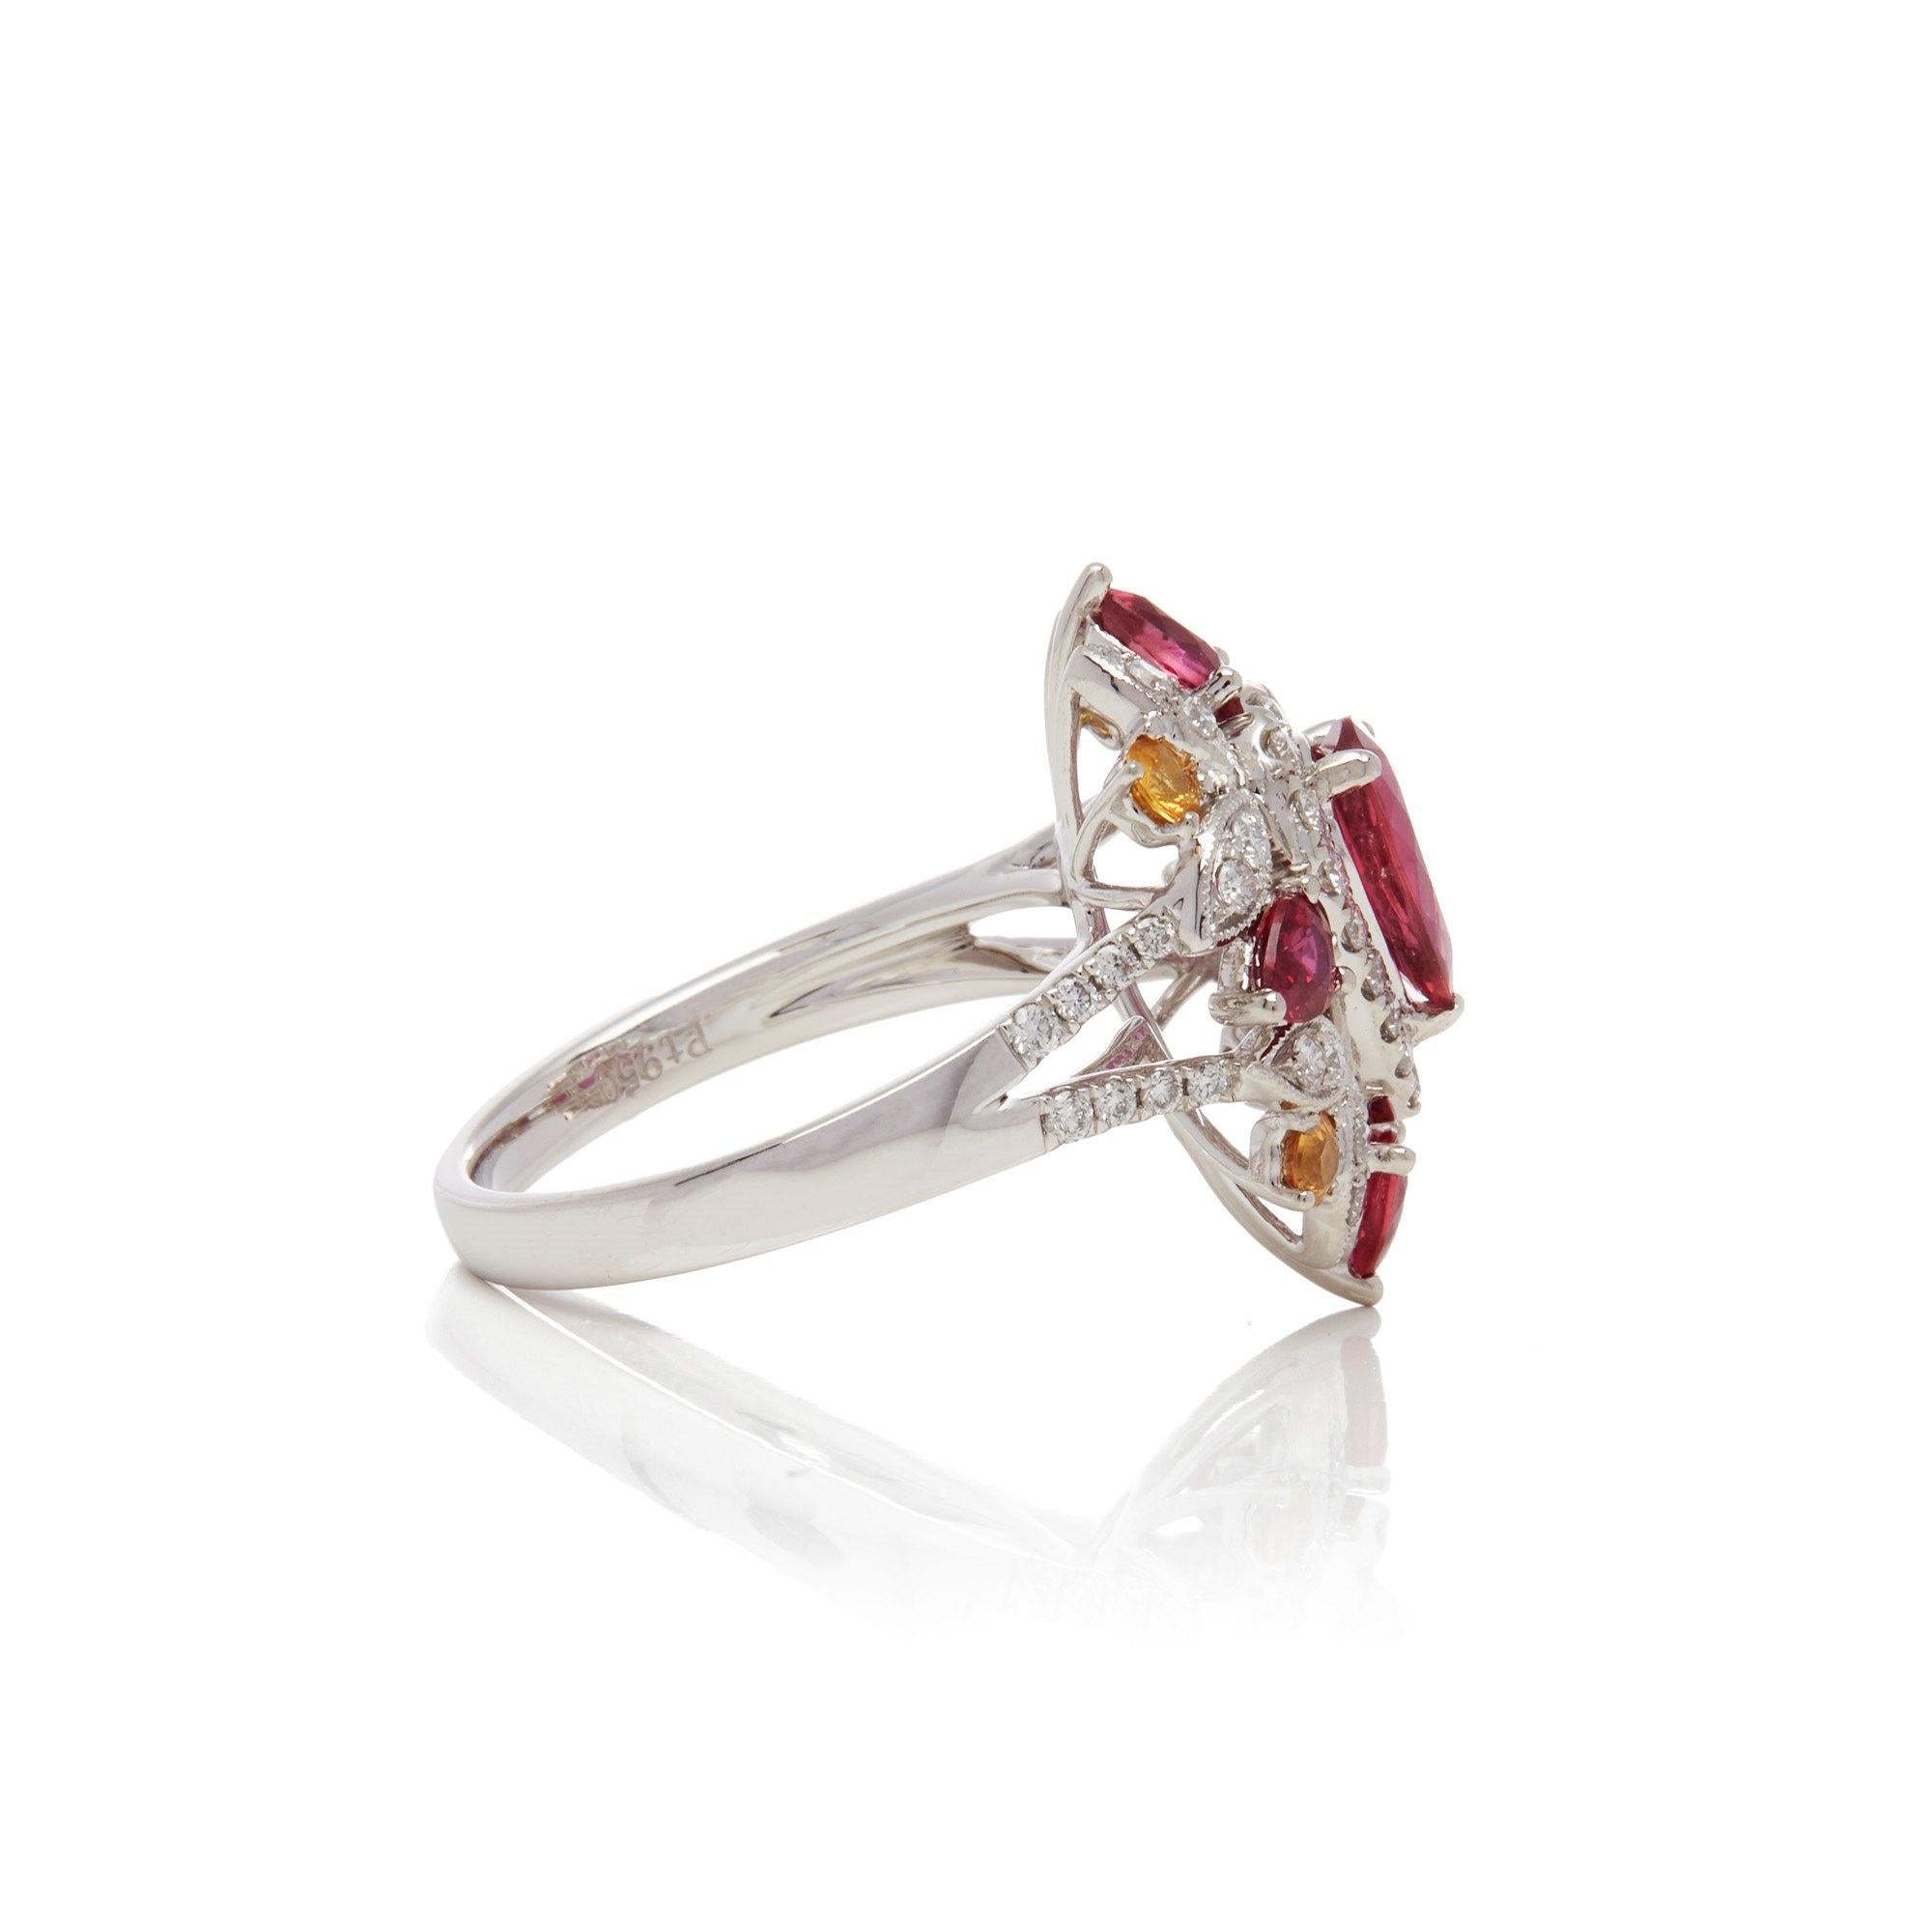 This ring designed by David Jerome is from his private collection and features one pear cut Ruby sourced in Mozambique. Set with a mix of round brilliant cut Diamonds, pear cut Rubies and round cut yellow Sapphires totalling 1.84cts combined.